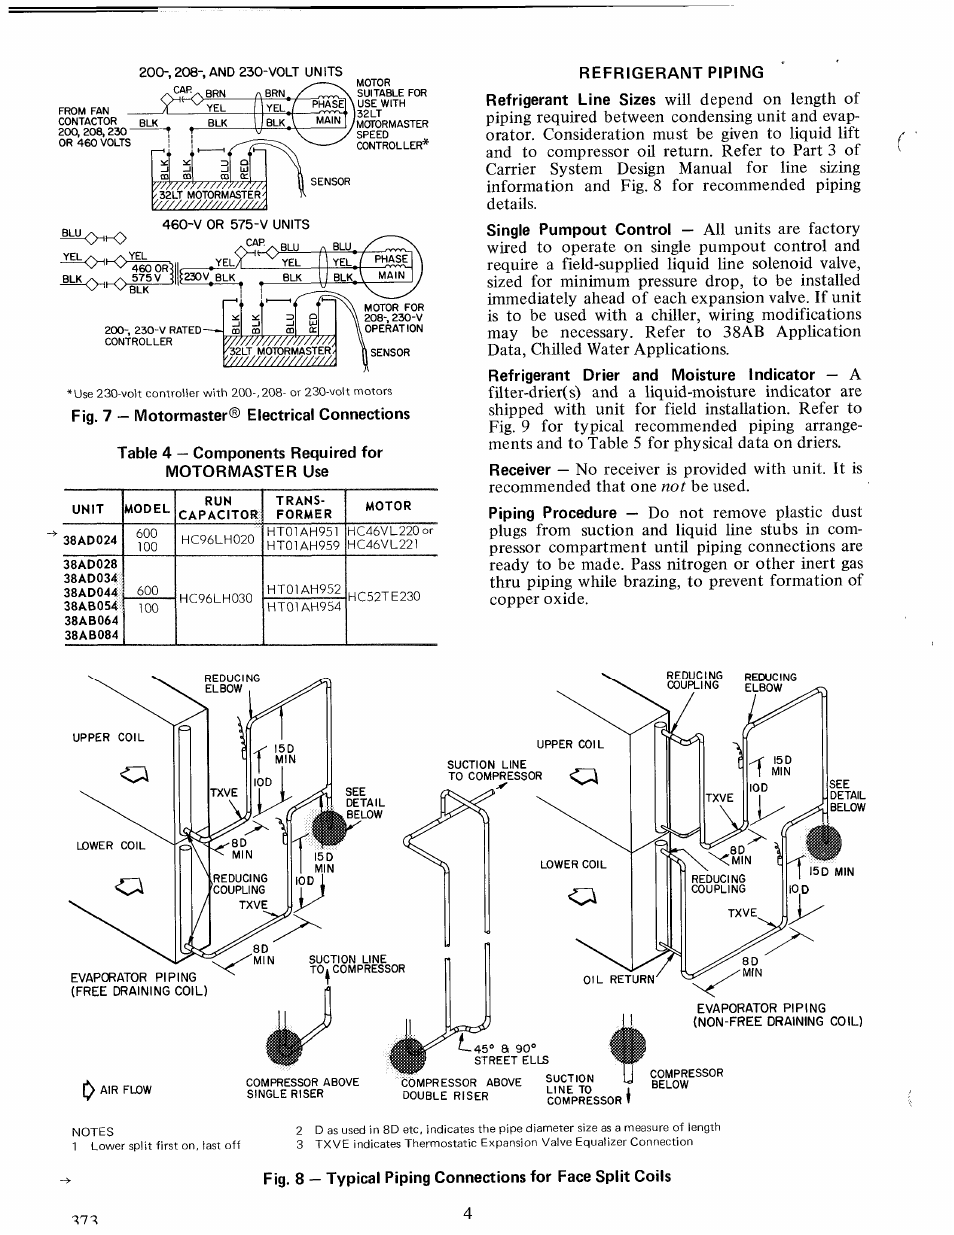 Refrigerant piping | Carrier 38AD028 Carri38AD044 User Manual | Page 4 / 12